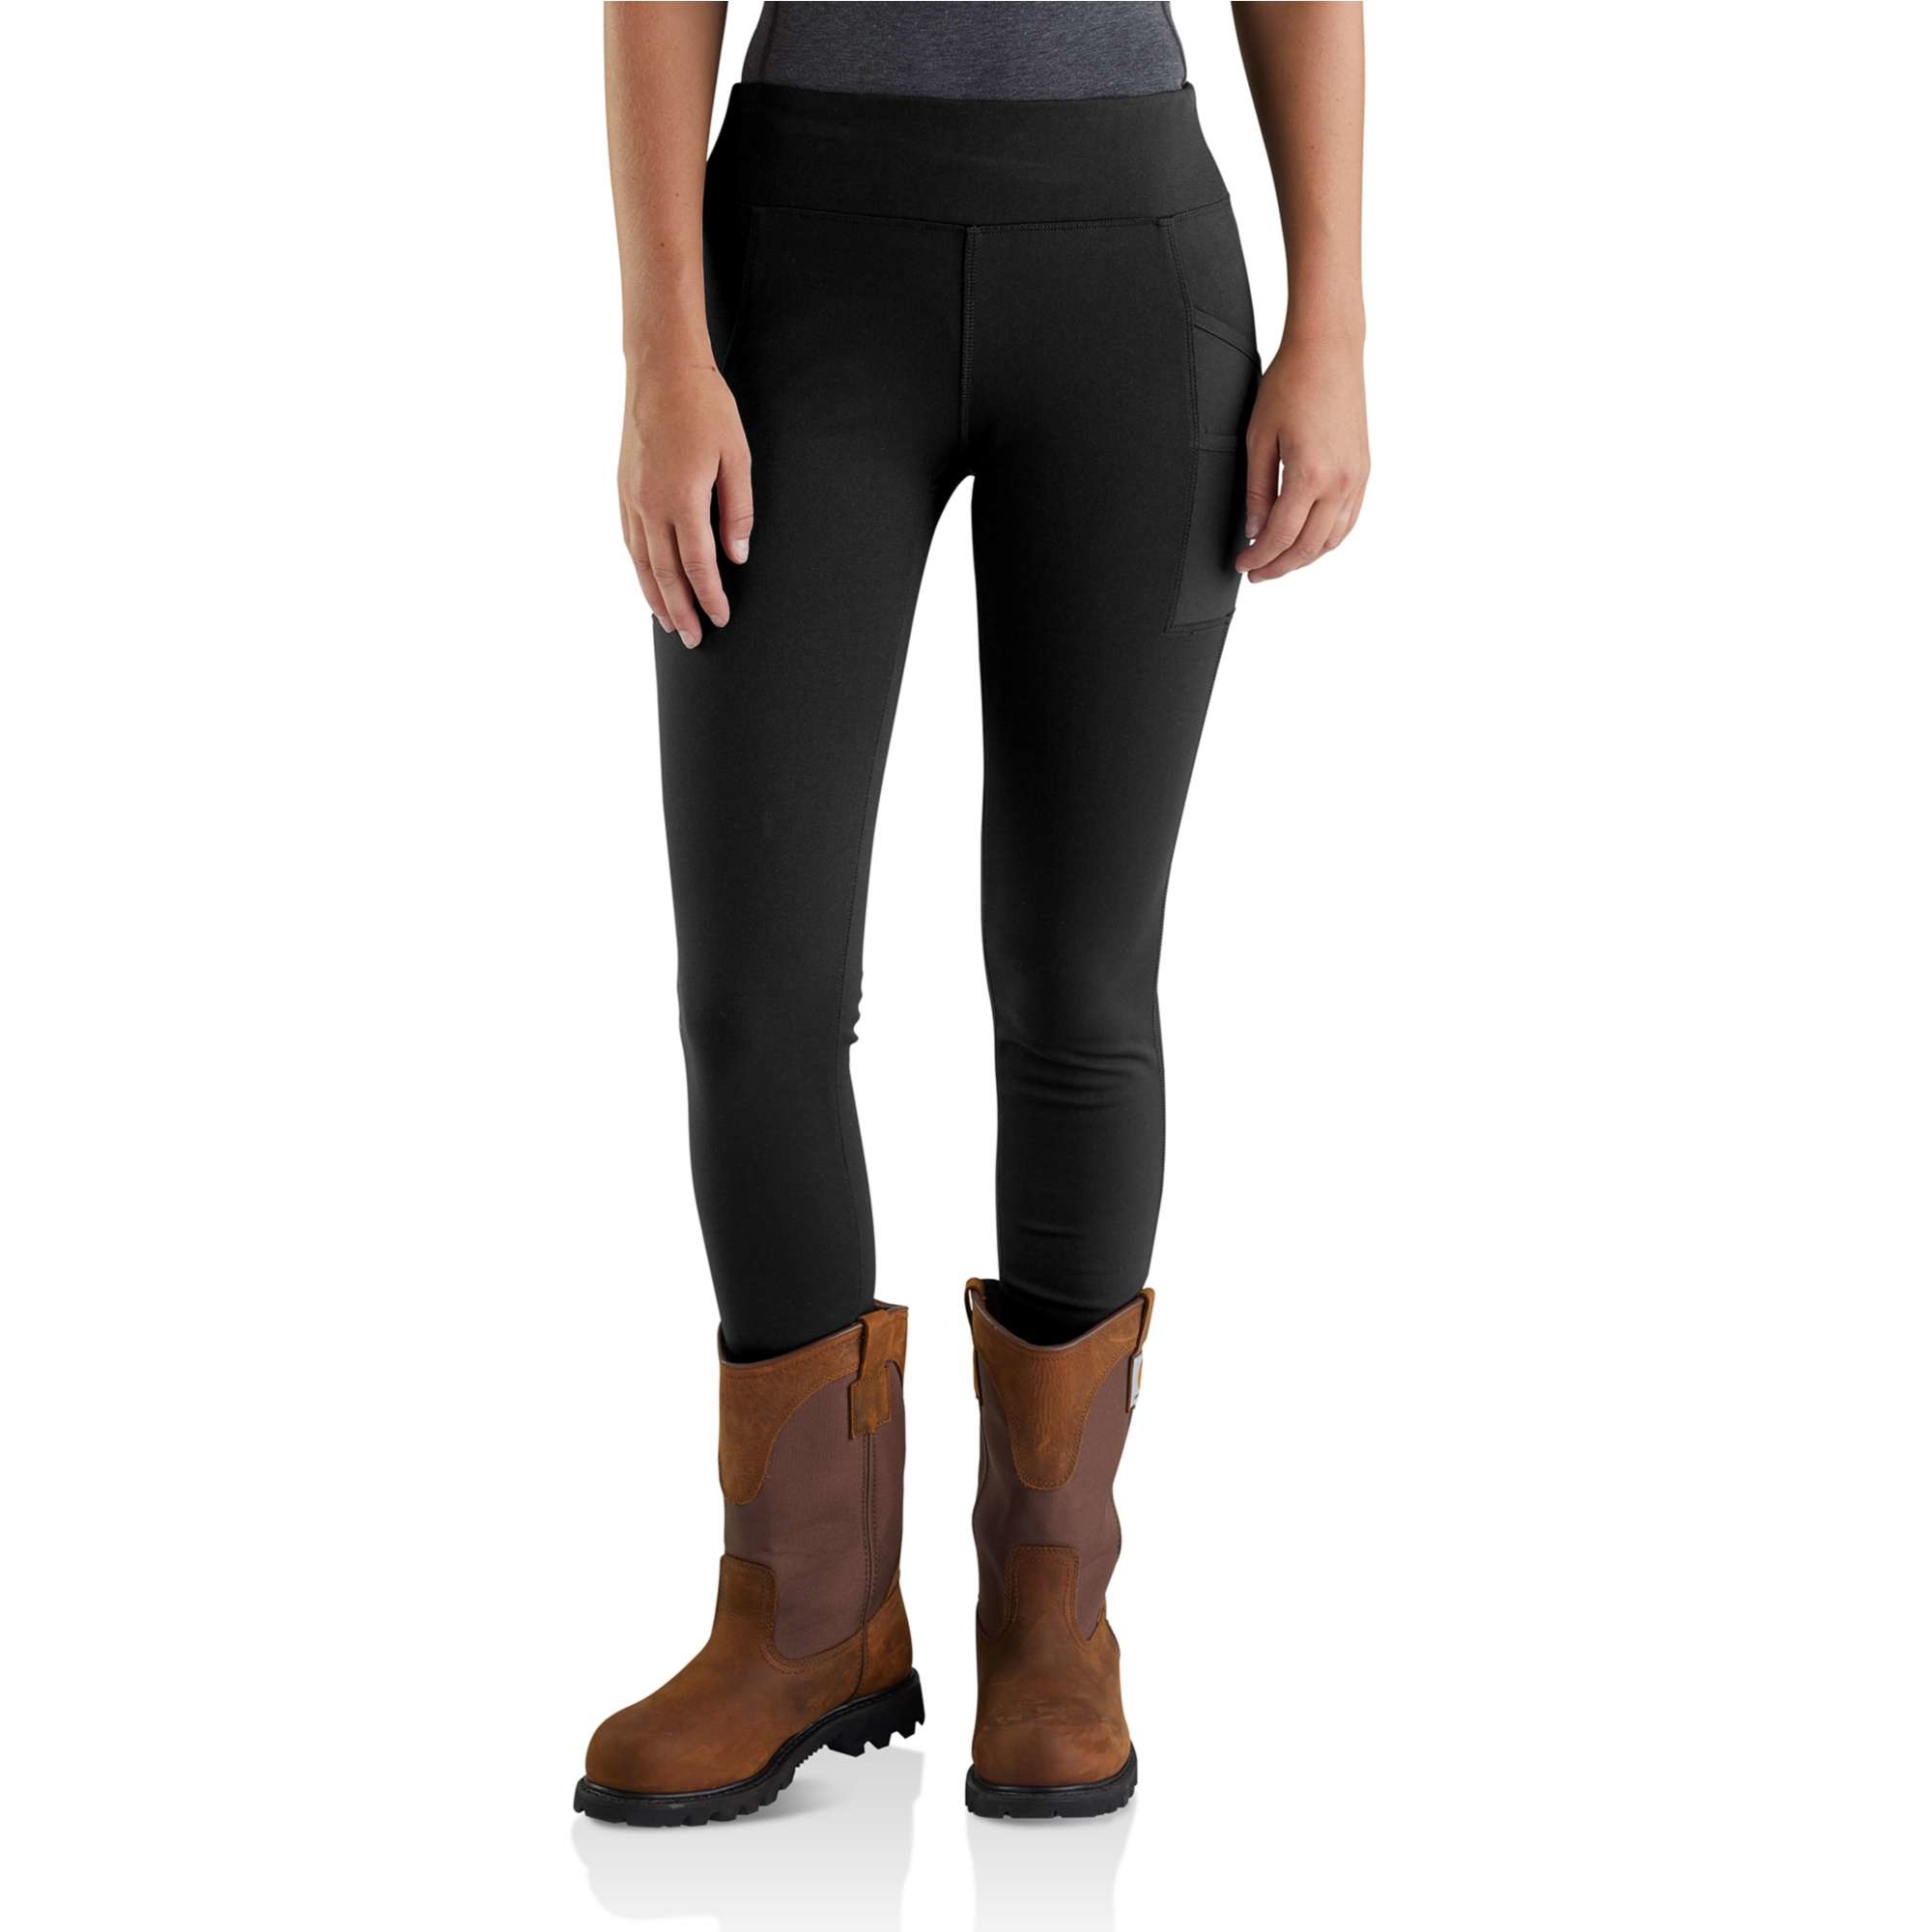 Carhartt Women's Flame Resistant Force Fitted Midweight Utility Legging